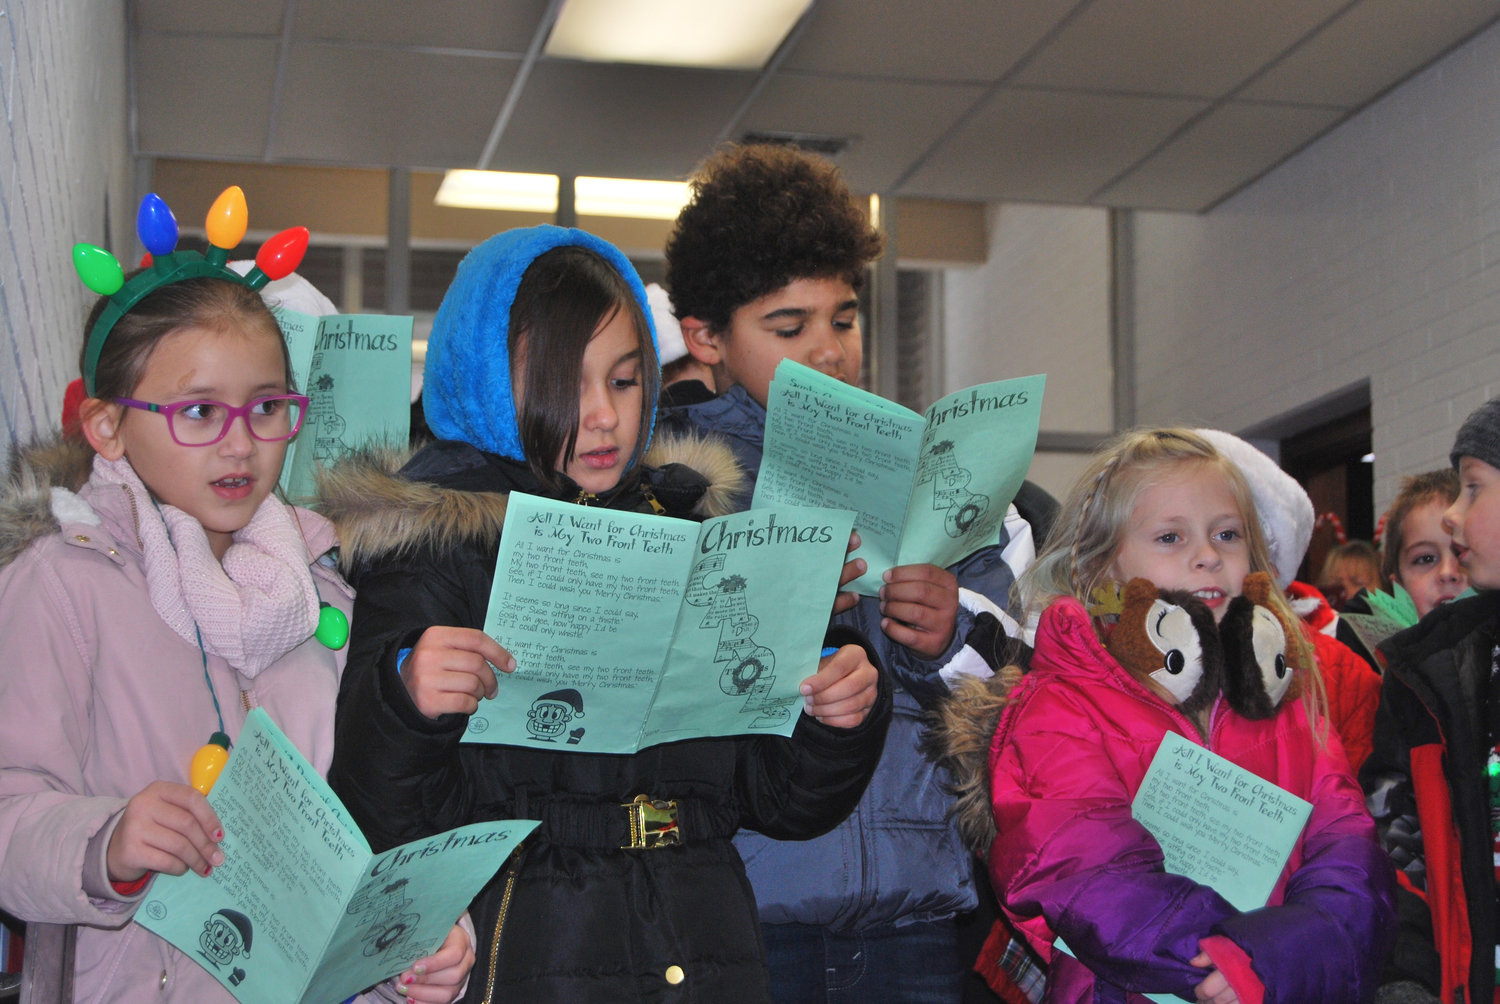 Nicholson Elementary School students sang Christmas songs Friday at local businesses, including the Journal Review. There were about ninety children from four classrooms who helped spread holiday cheer.